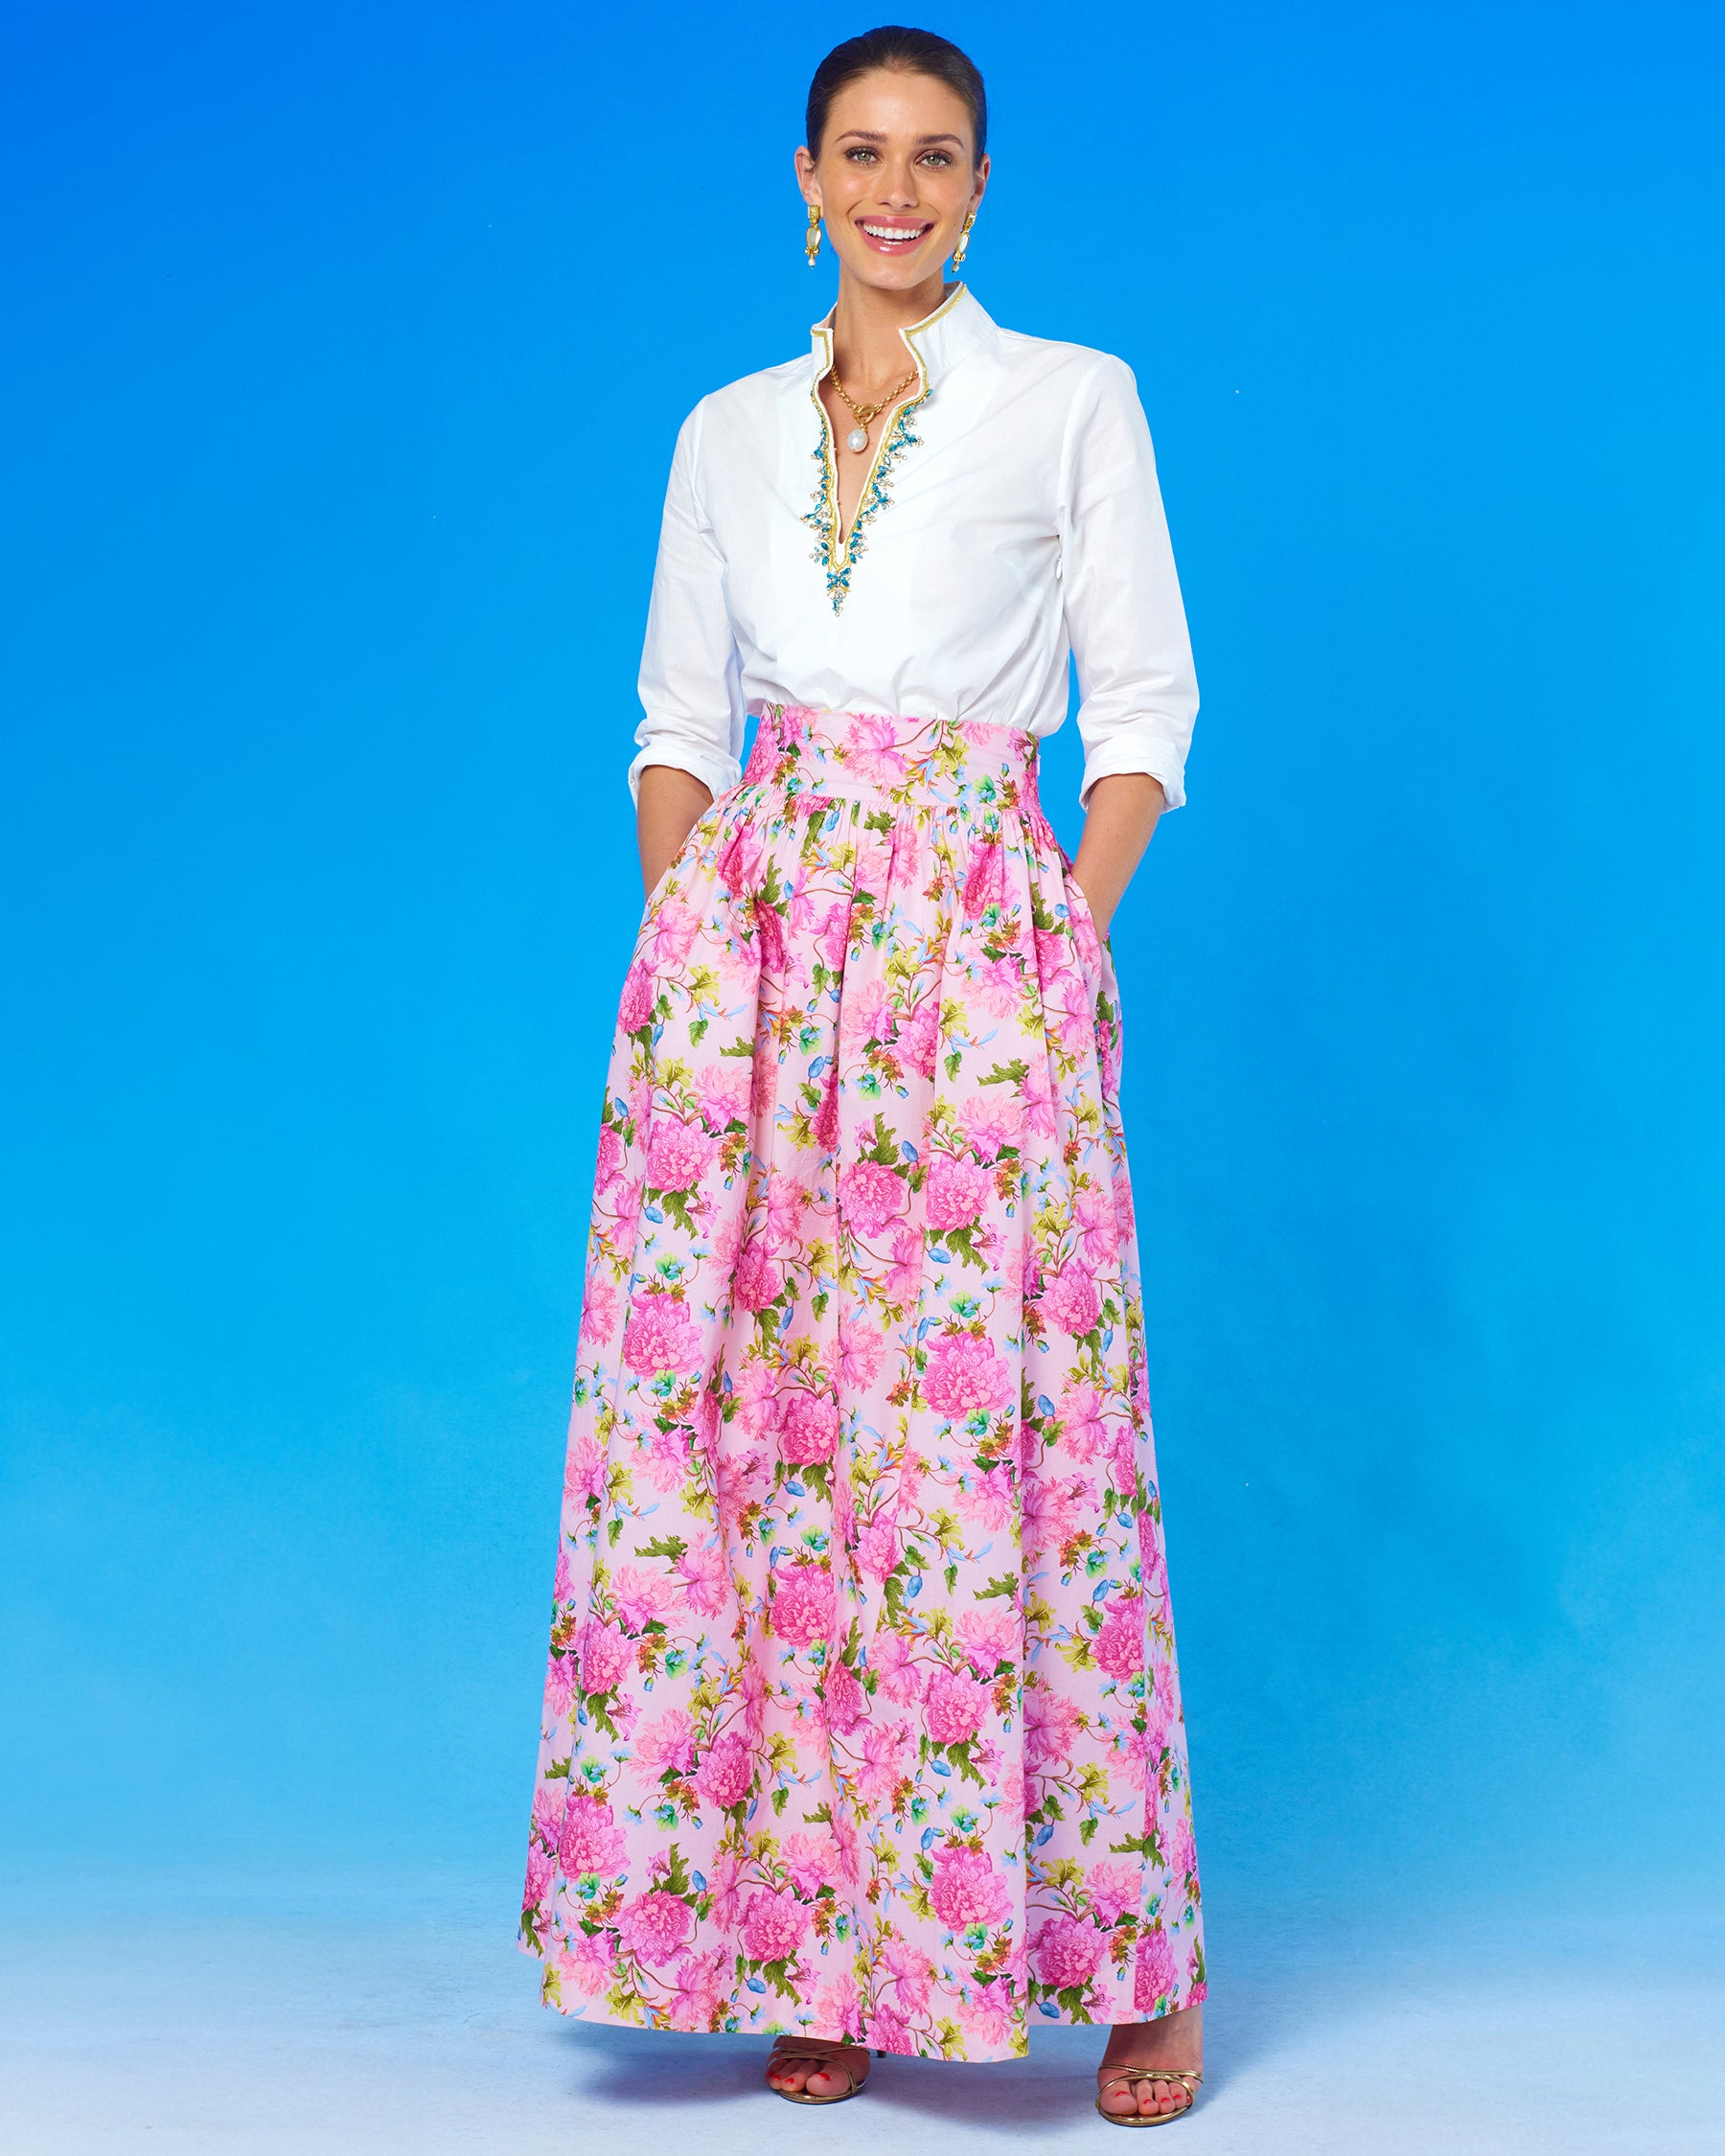 Alexandra Long Full Skirt in English Roses-Full front view with hands in pockets